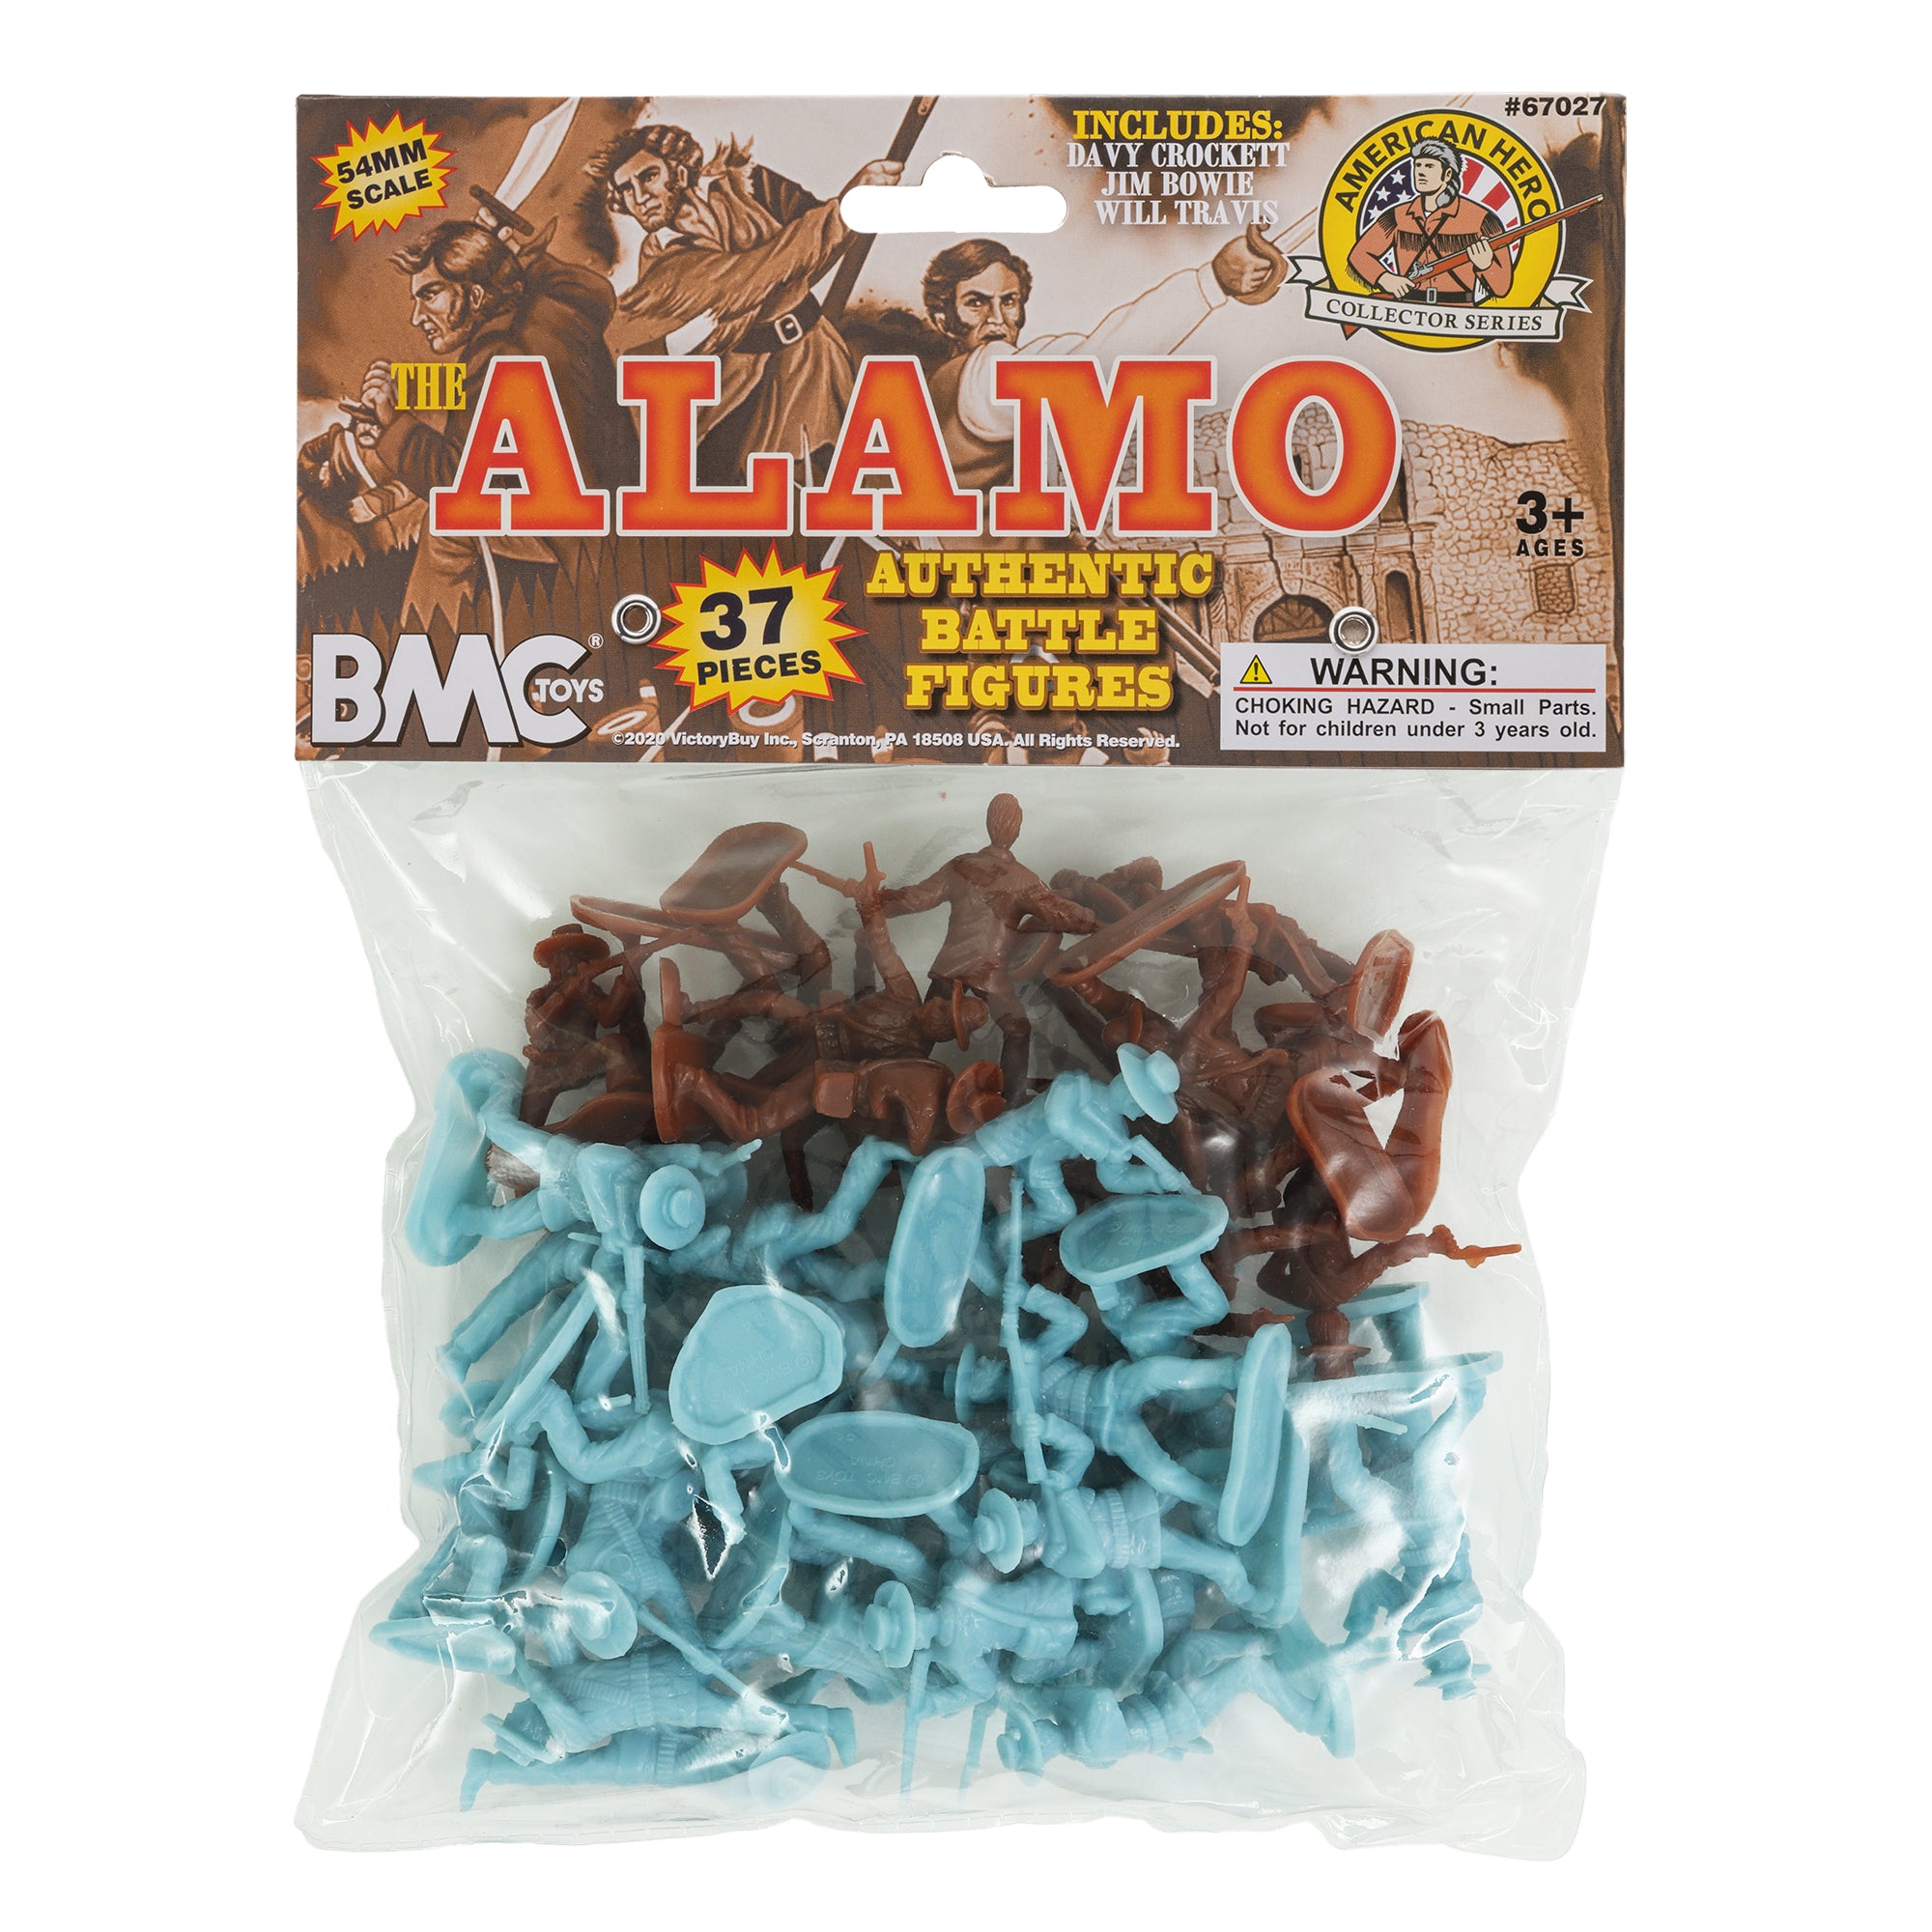 BMC Alamo Texans - 12 figures in 5 poses - 54mm plastic toy soldiers